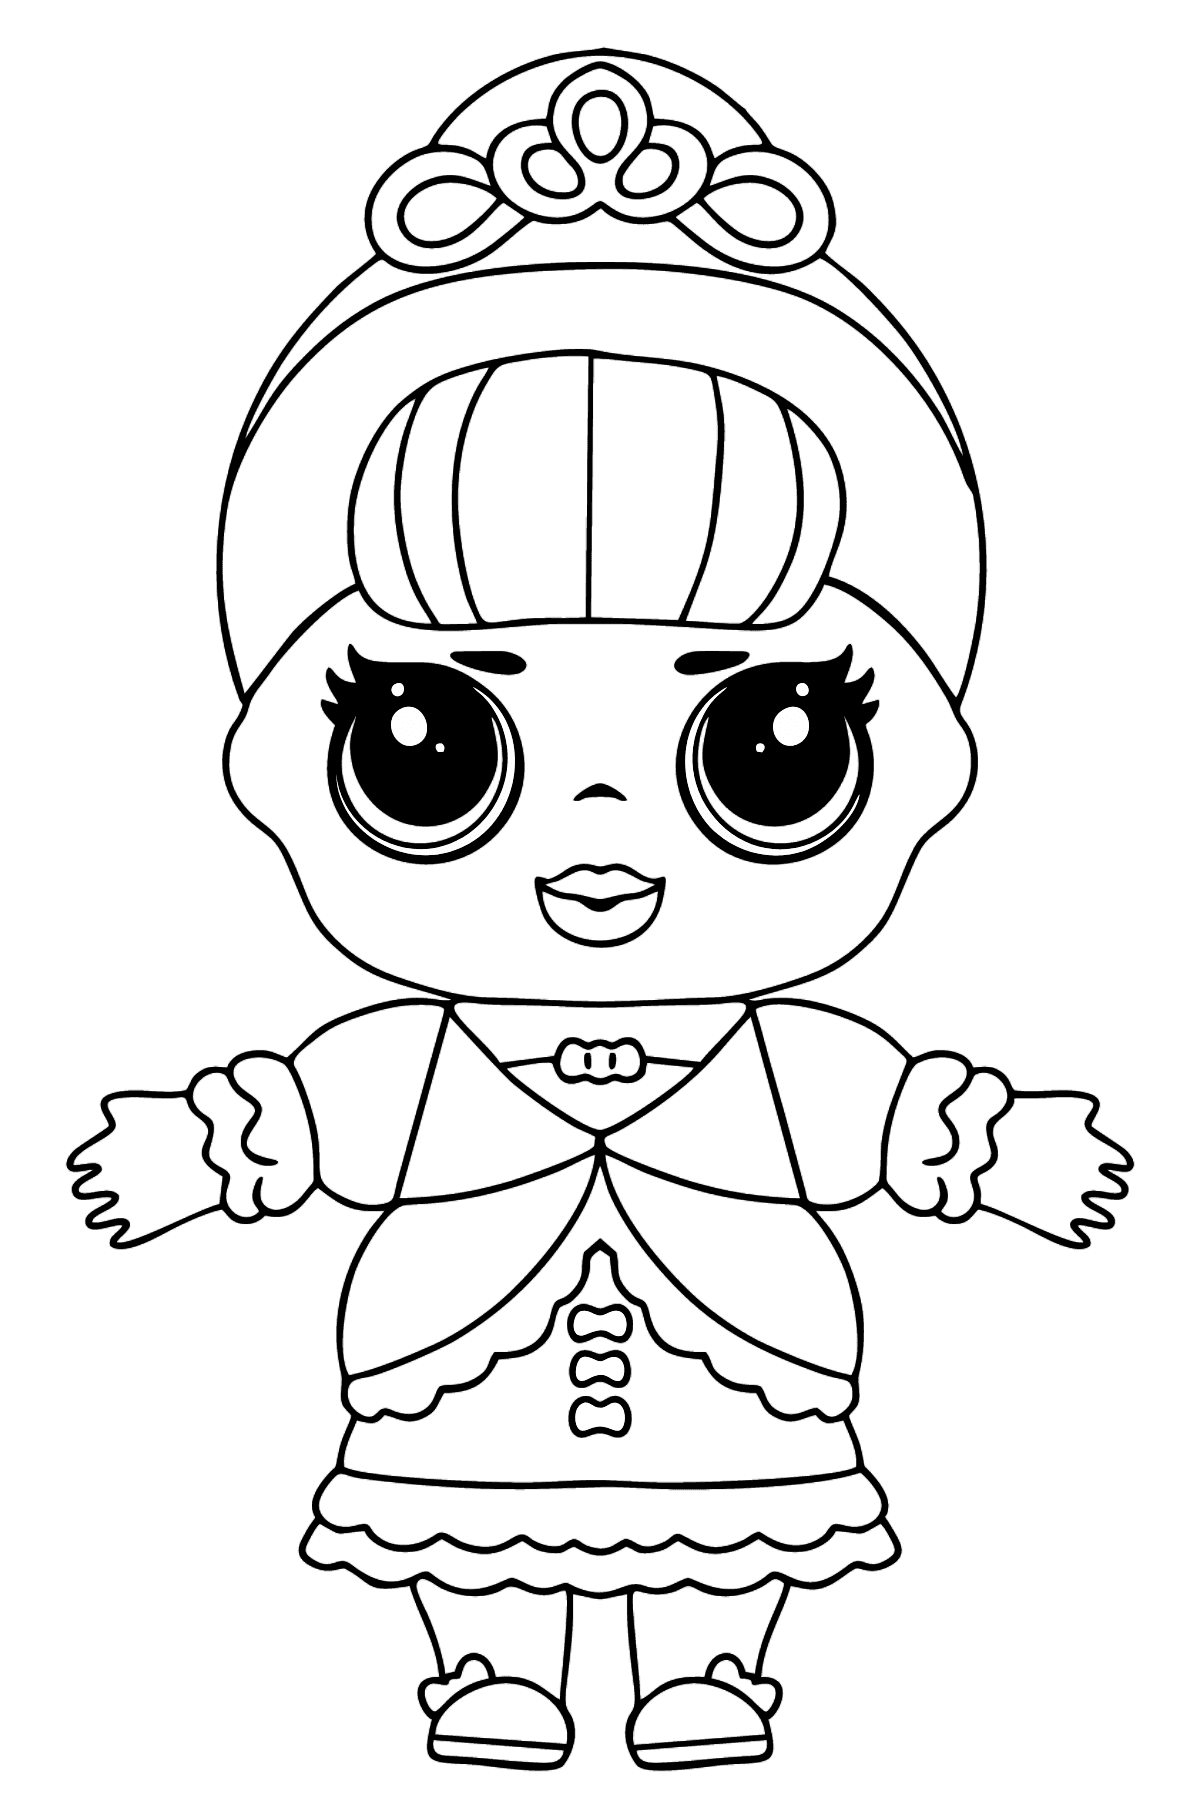 L.O.L. Surprise Doll Fancy Coloring page - Coloring Pages for Kids